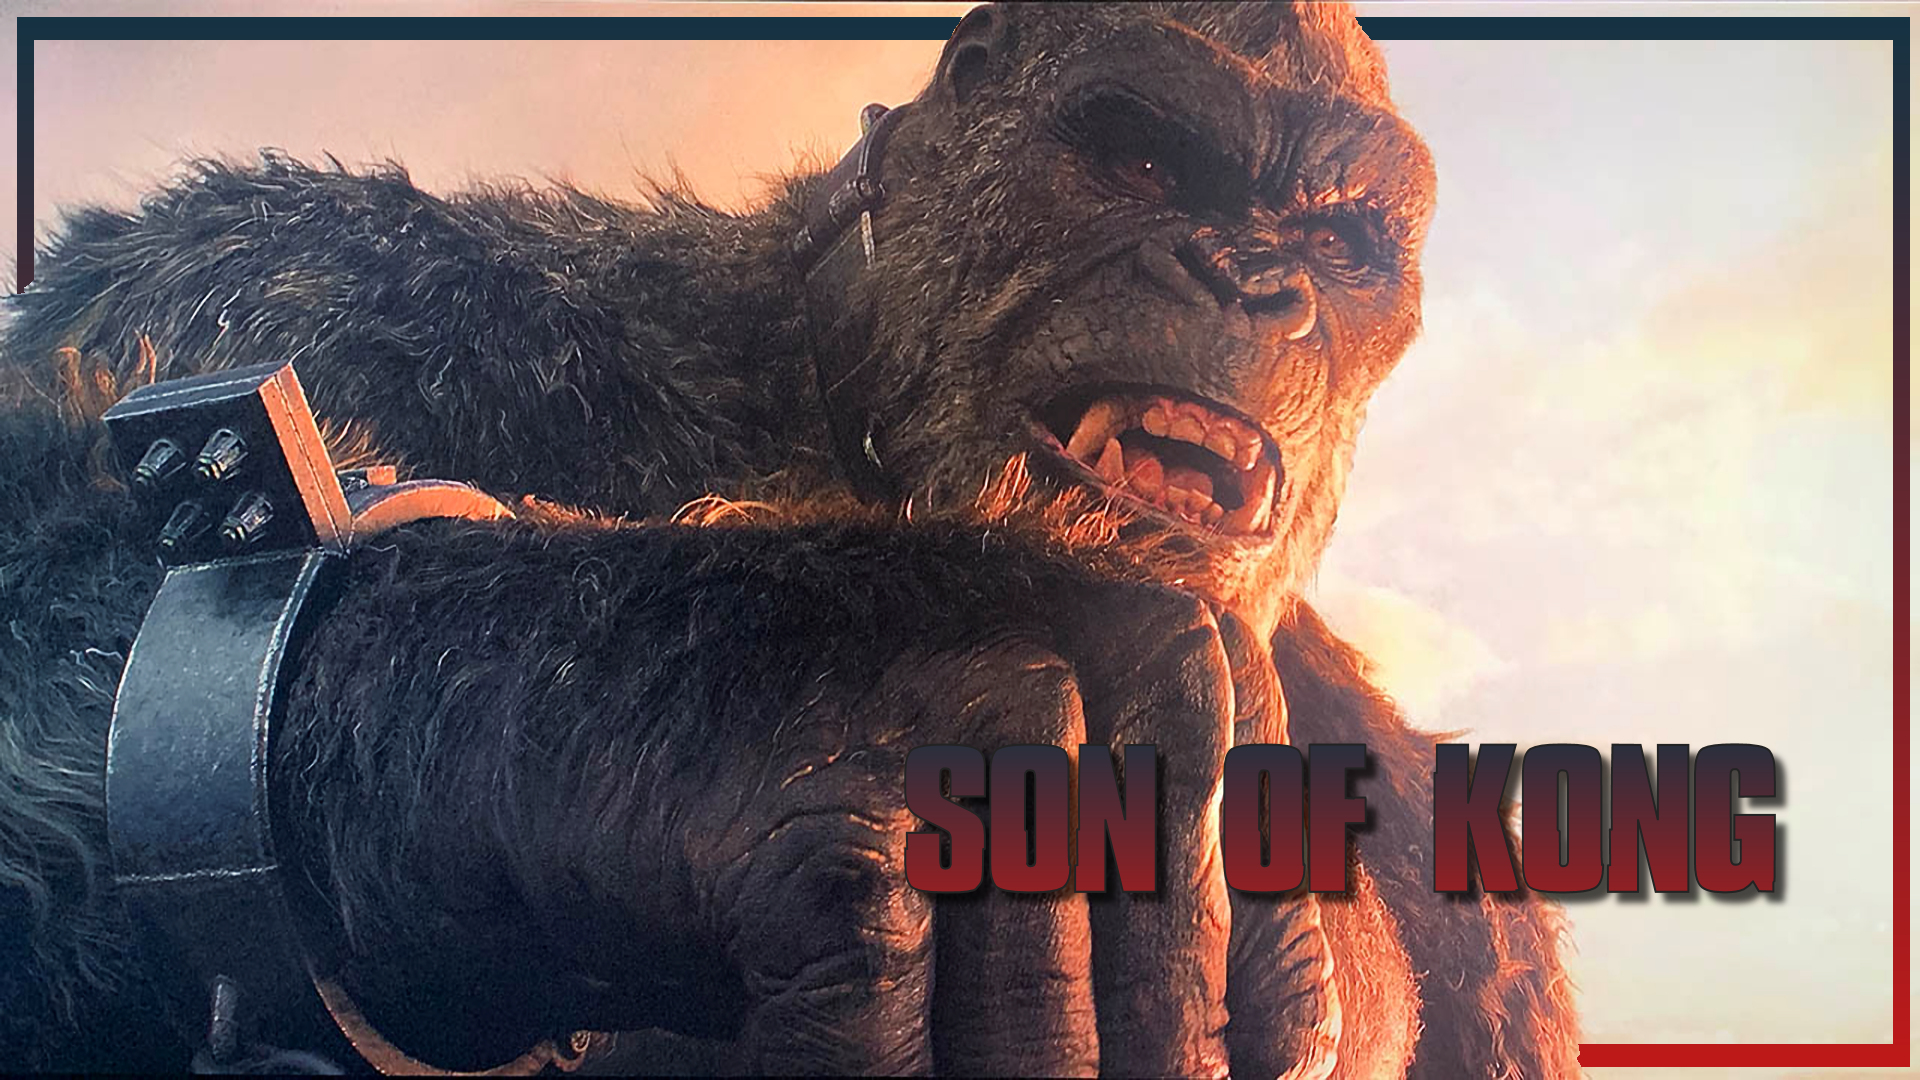 Son Of Kong To Be The Next Monsterverse Film? Future of the Force